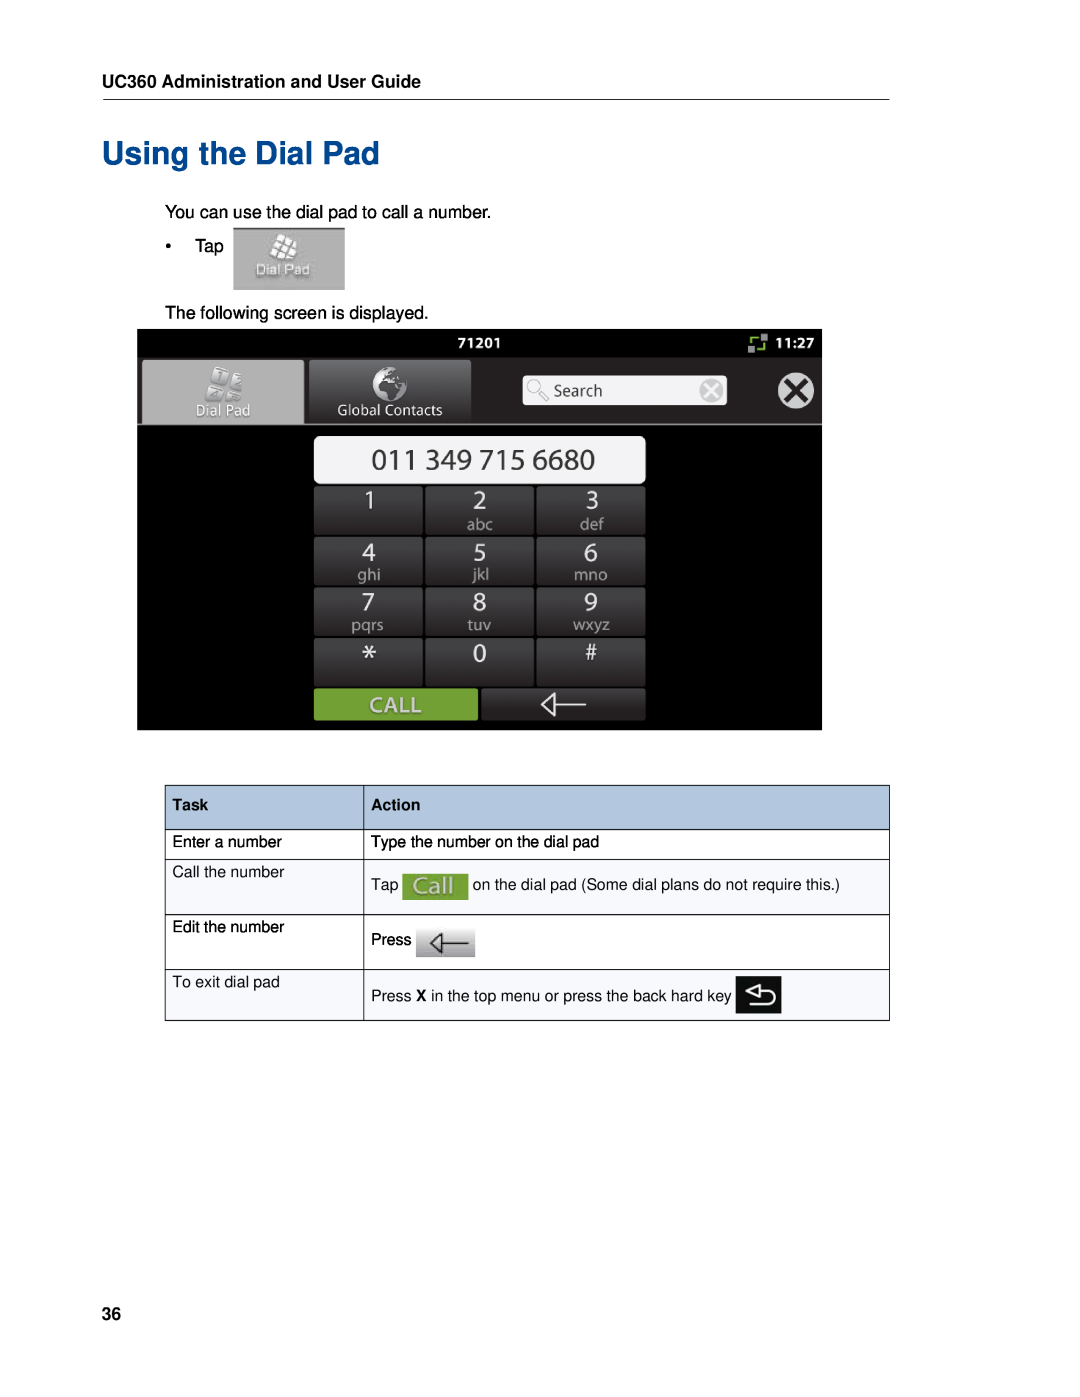 Mitel Using the Dial Pad, UC360 Administration and User Guide, You can use the dial pad to call a number Tap, Task 